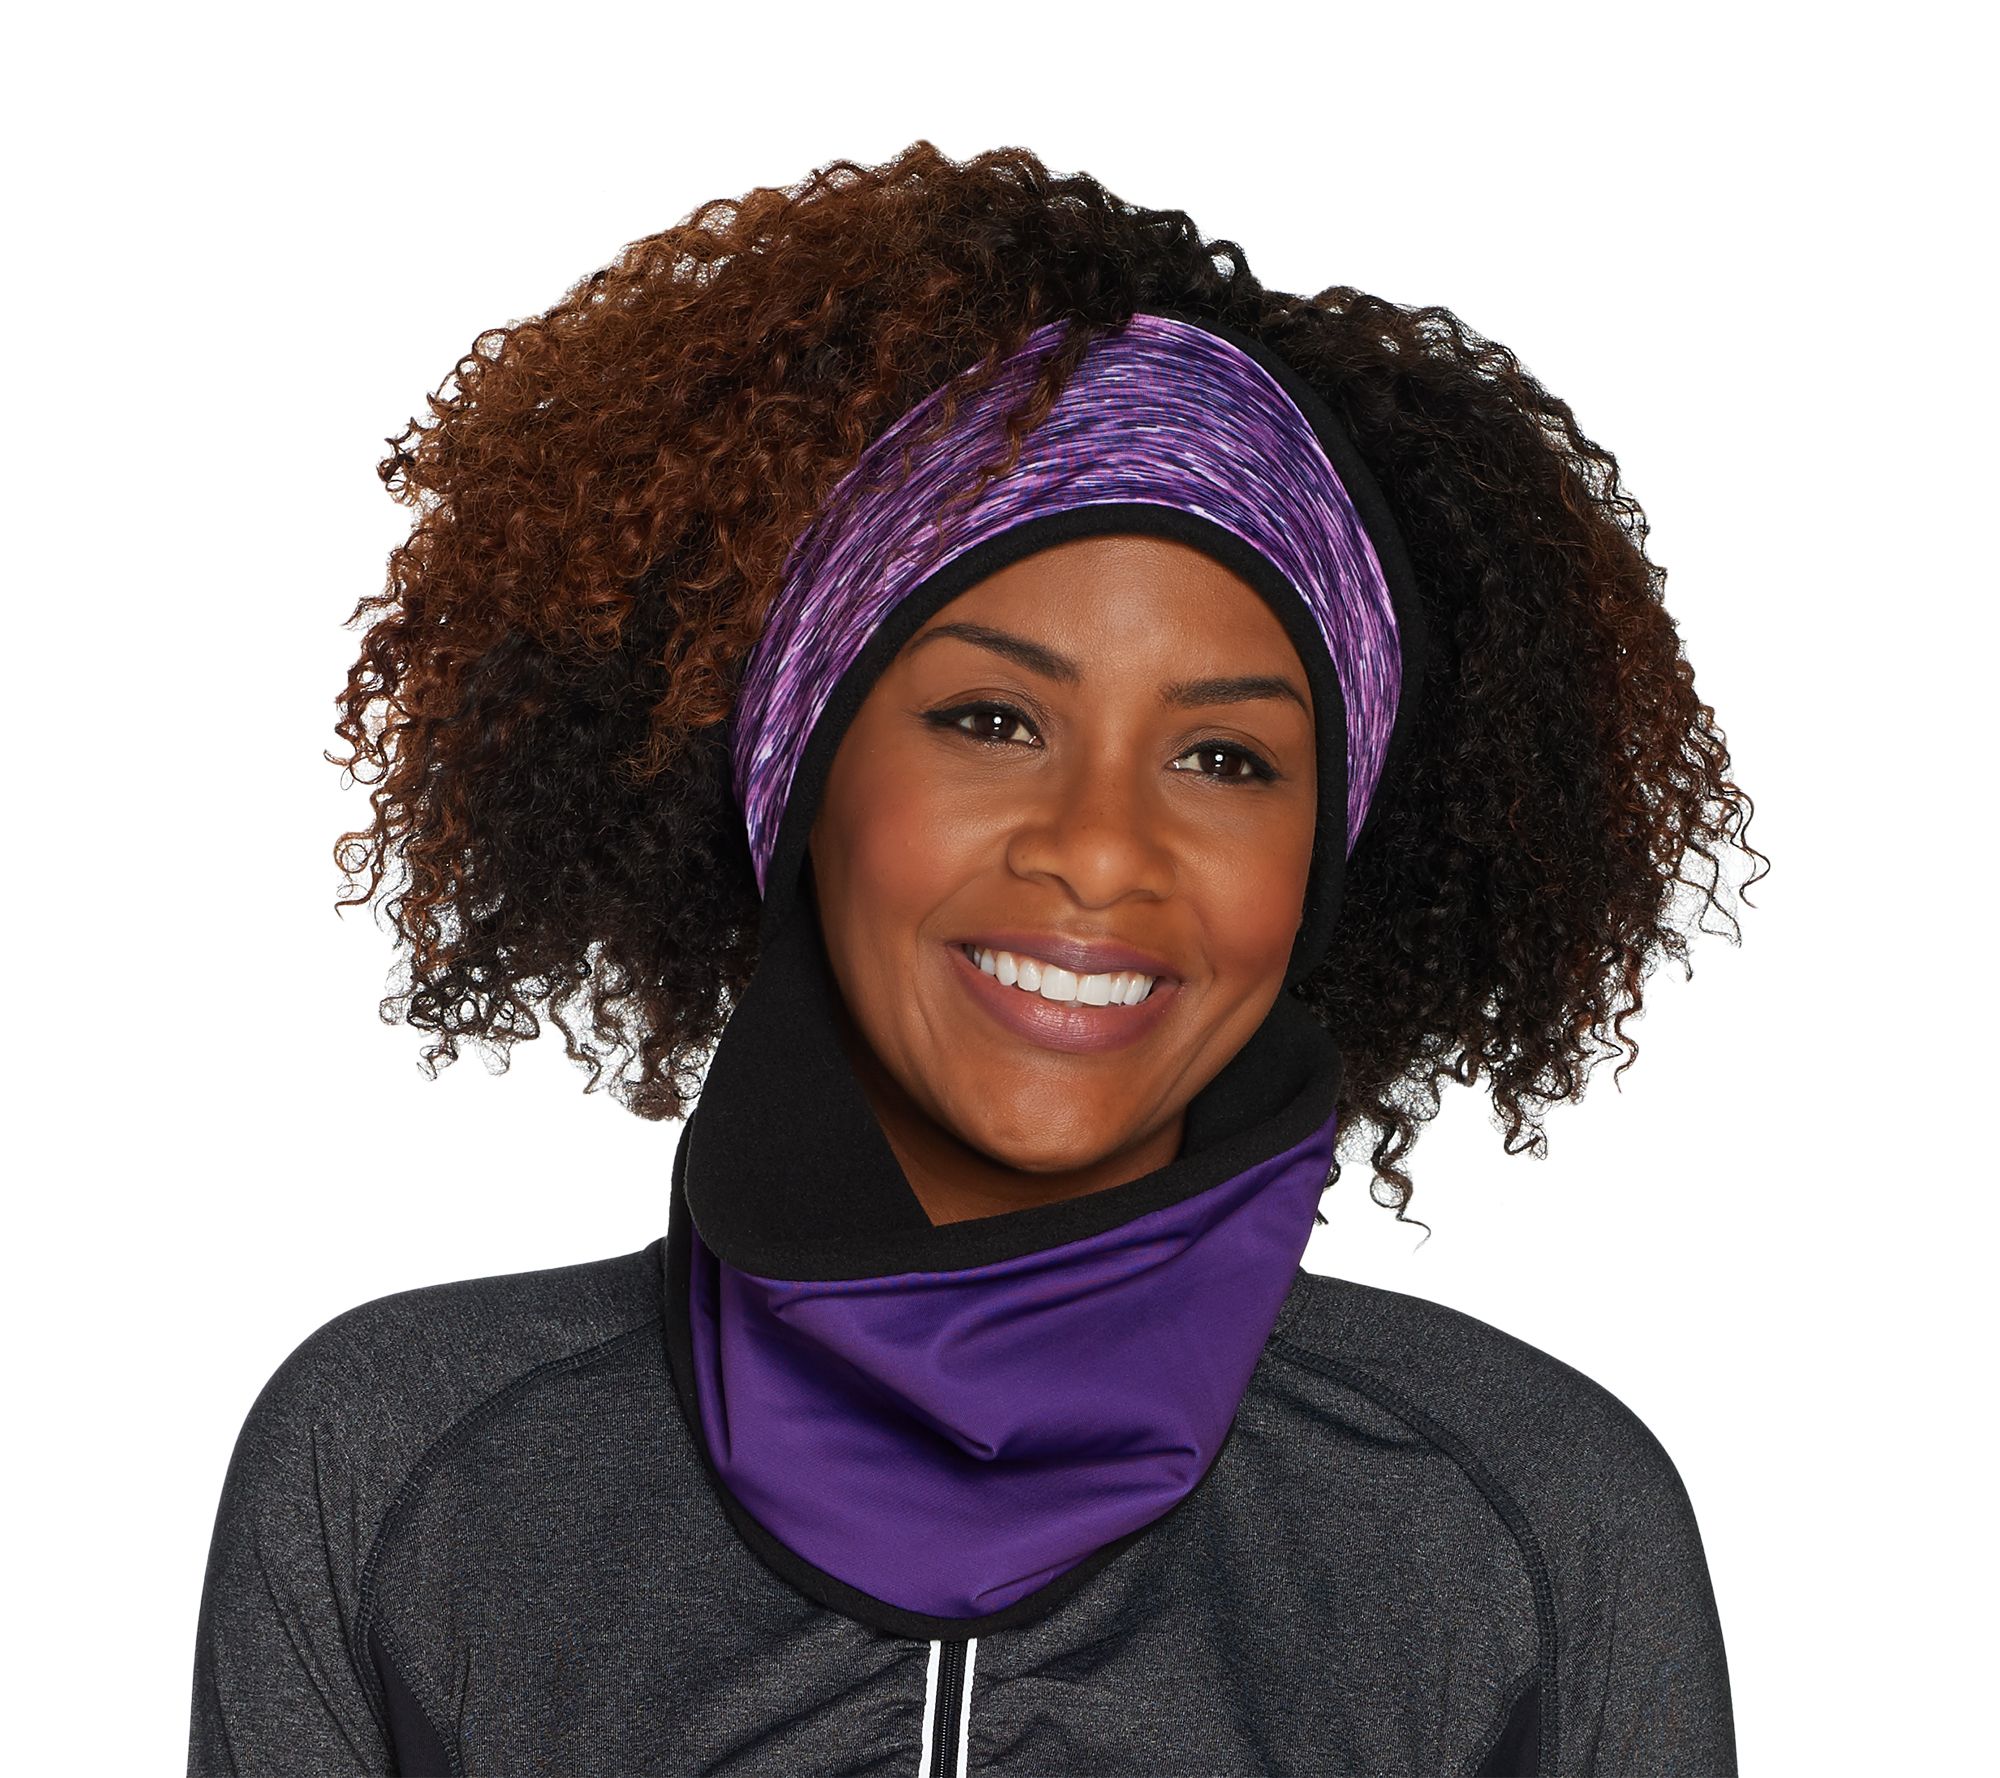 Polar by Neck Attached Gaiter Sprigs with Band-It Headband